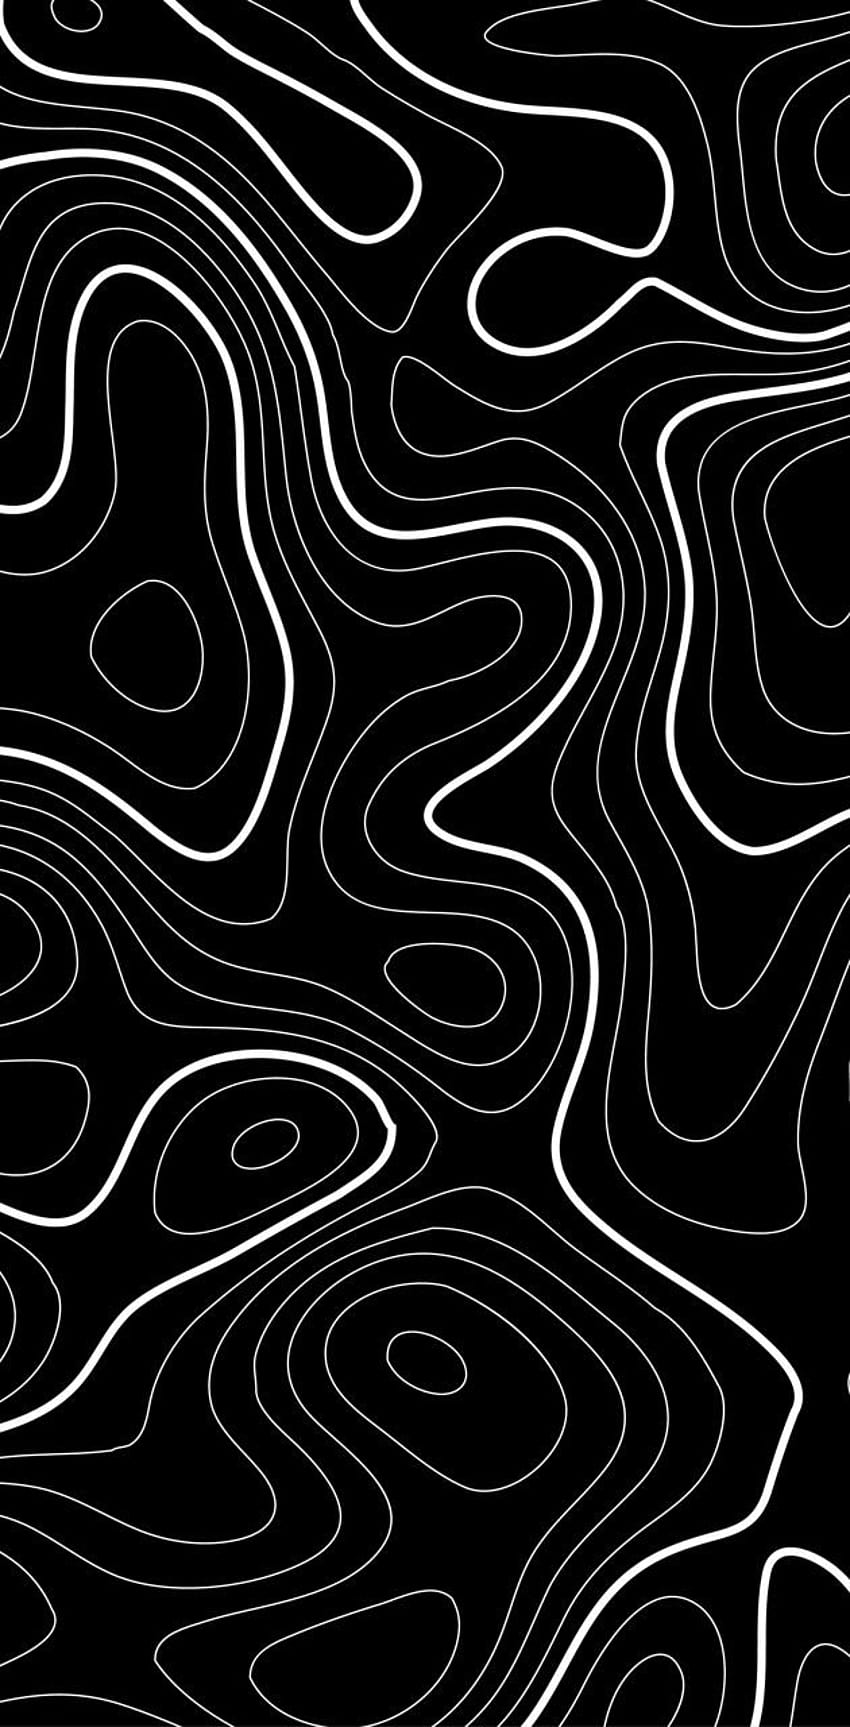 Topographic outline by AguzFM, topographic phone HD phone wallpaper